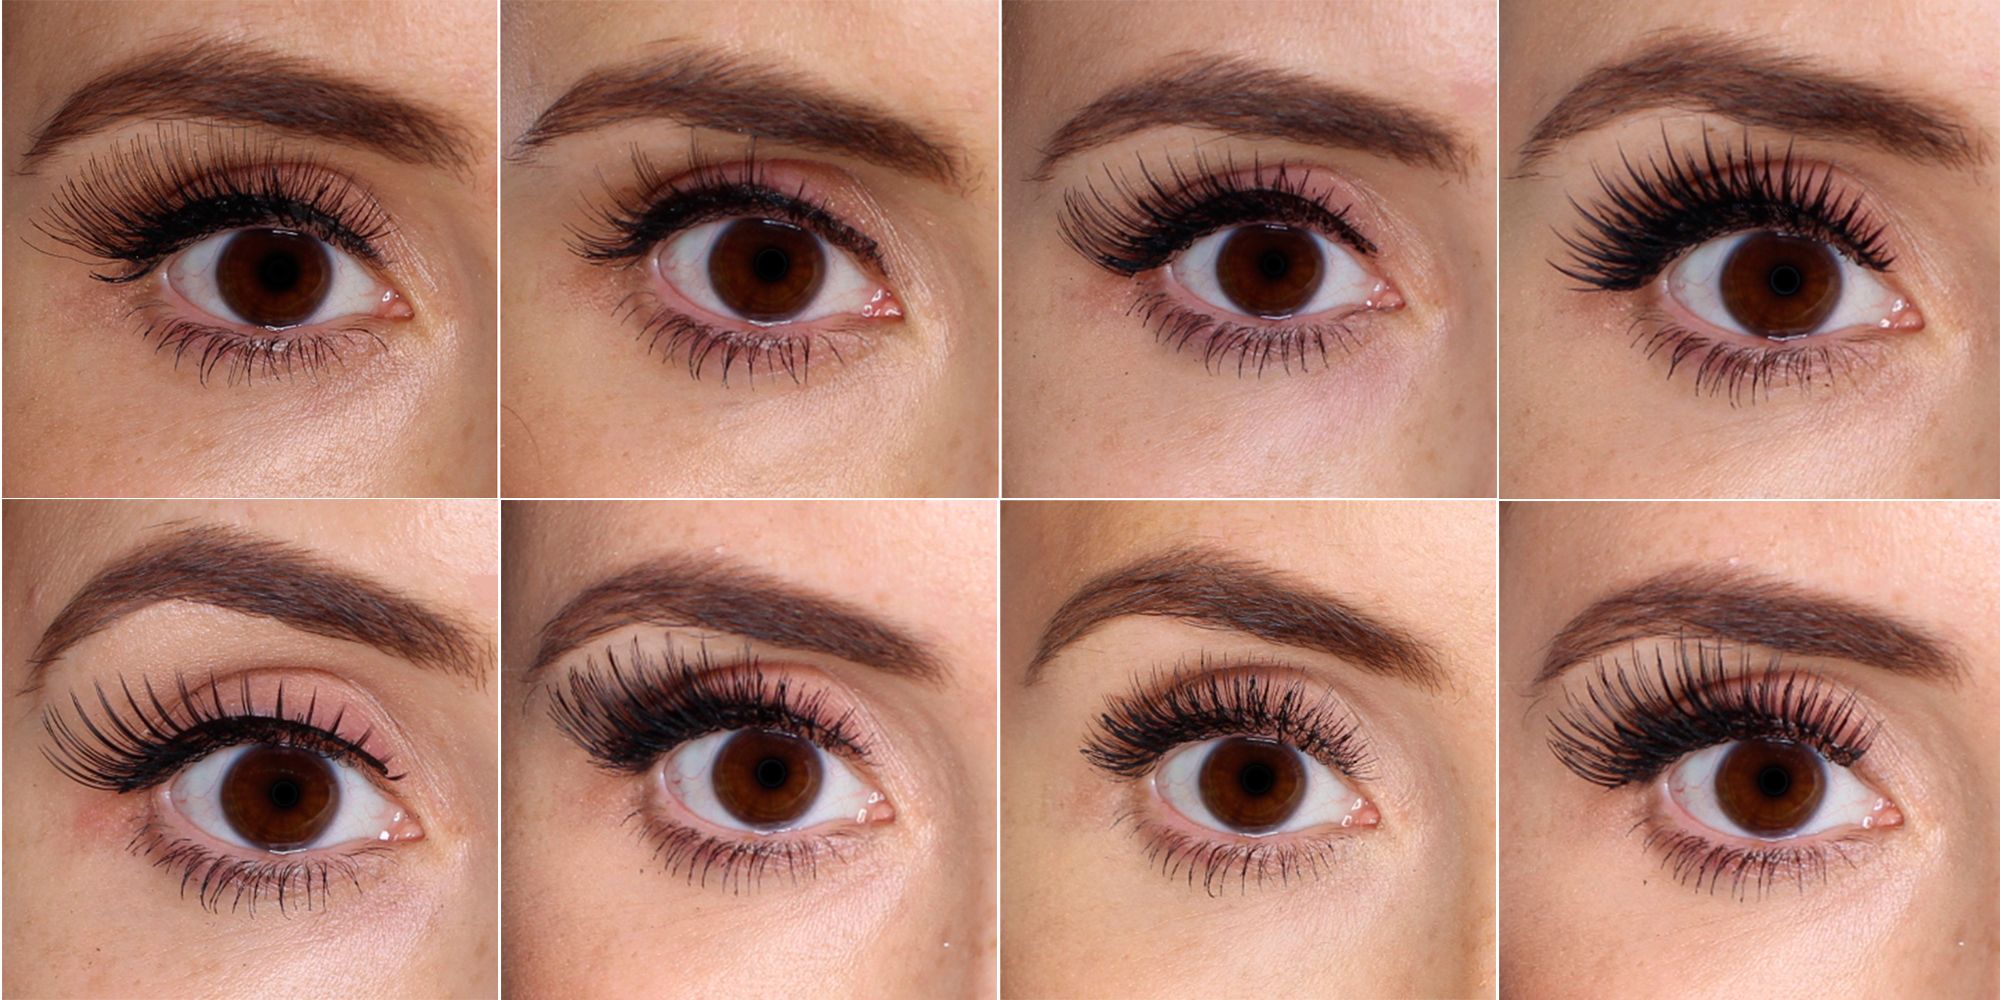 ardell false eyelashes before and after